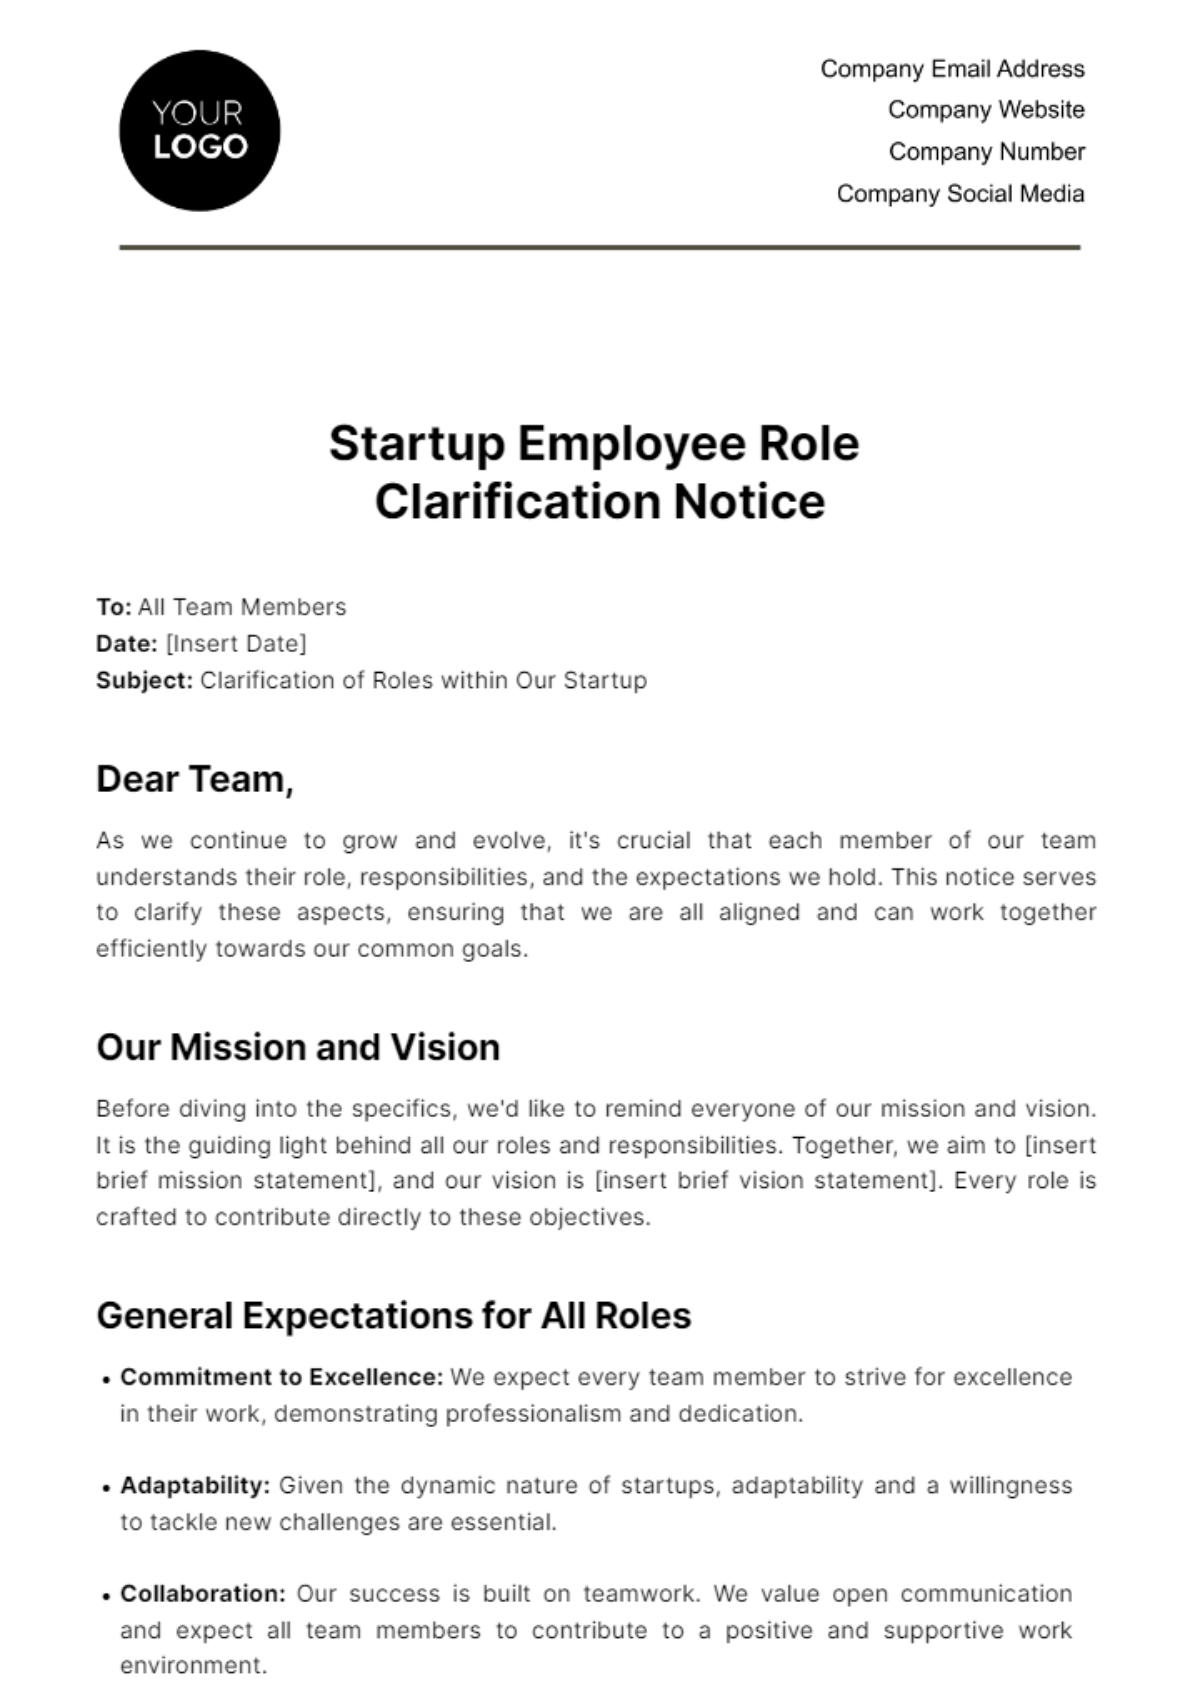 Startup Employee Role Clarification Notice Template